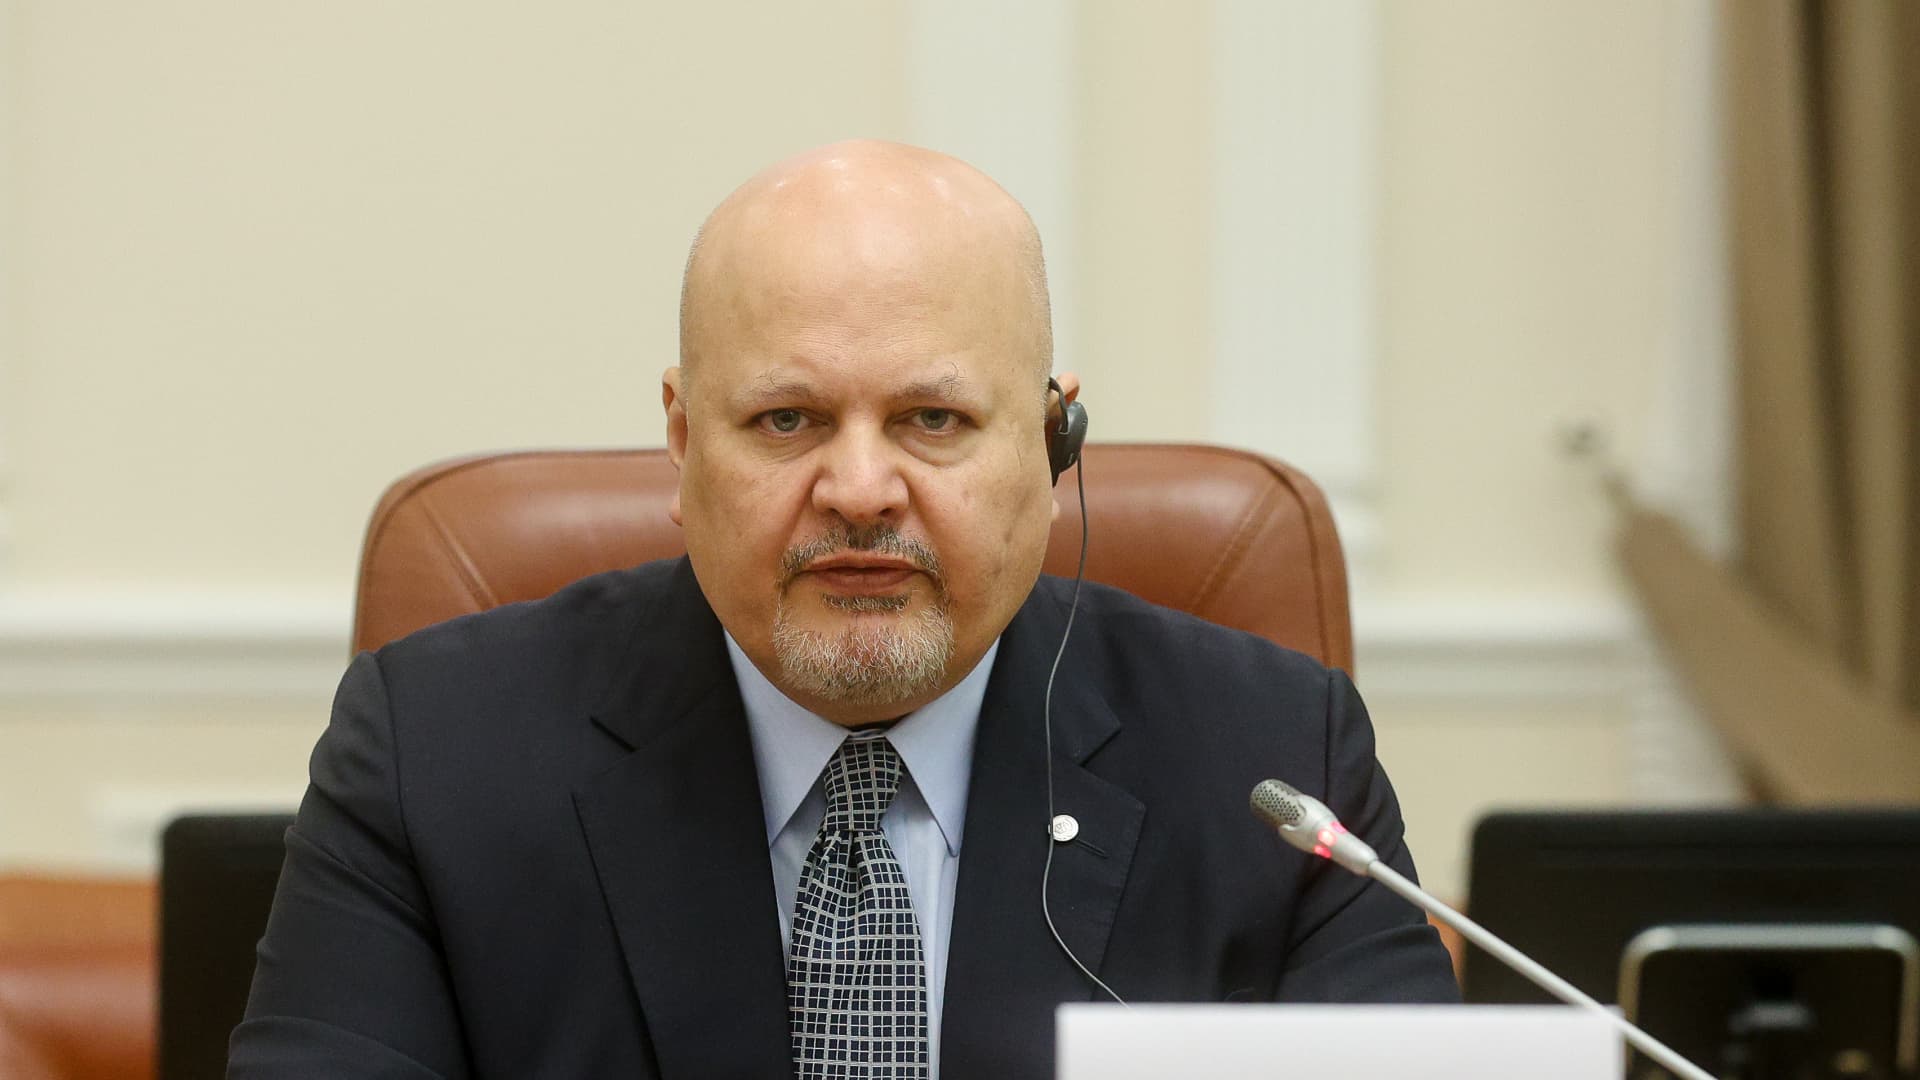 The Prosecutor of International Criminal Court Karim Ahmad Khan visits Kyiv and territories which were occupied by Russia in Ukraine, April 14, 2022. Khan on Monday signed an agreement to join a joint investigation team set up by Lithuania, Poland, and Ukraine, to investigate alleged international crimes committed during the Ukraine war.